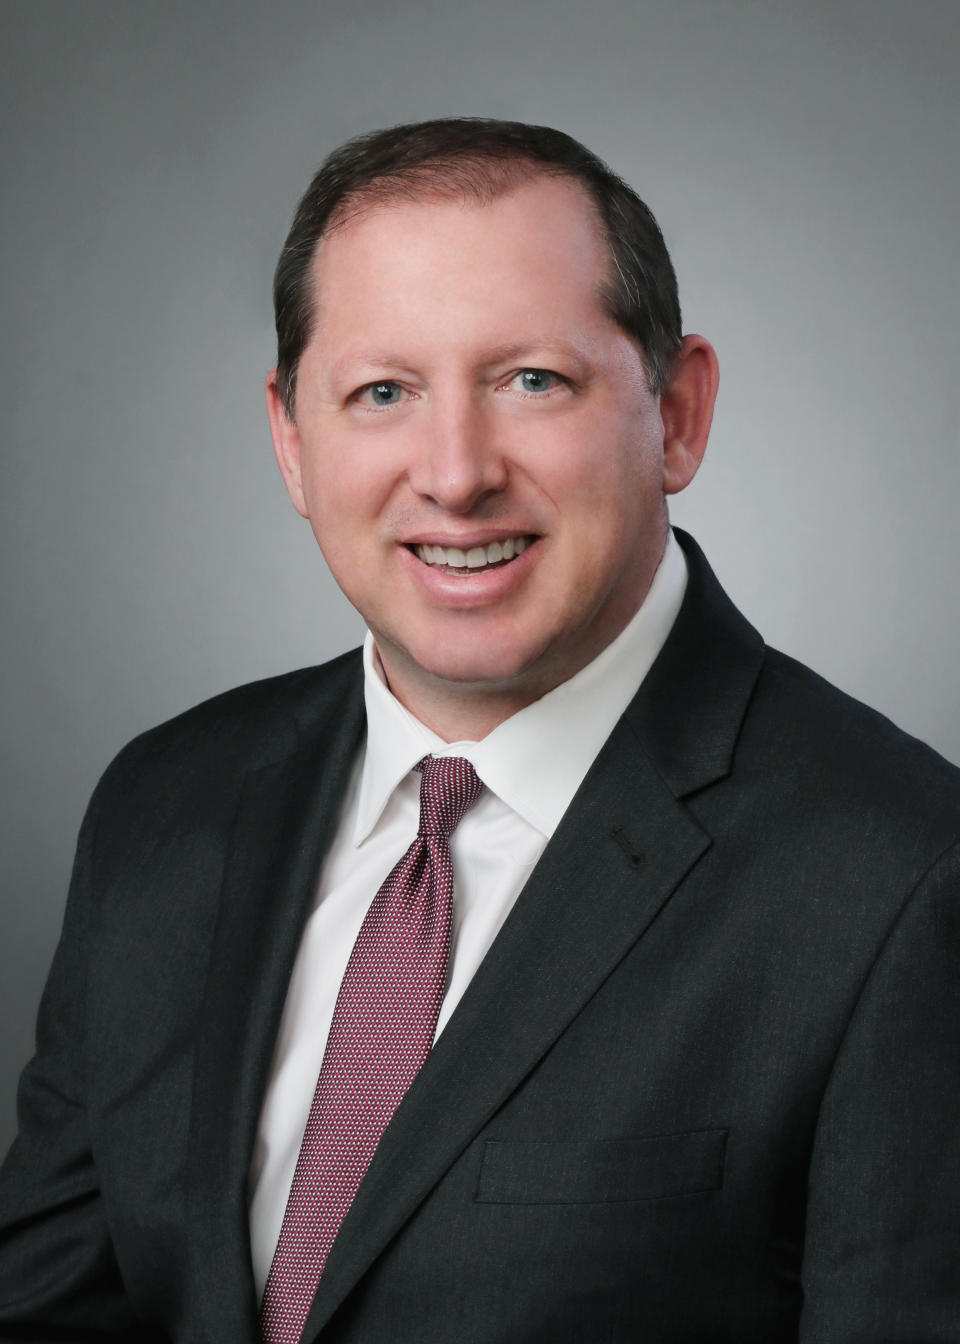 Middlesex Water's General Counsel, Jay L. Kooper, has been Named a Leader in Law by NJBIZ